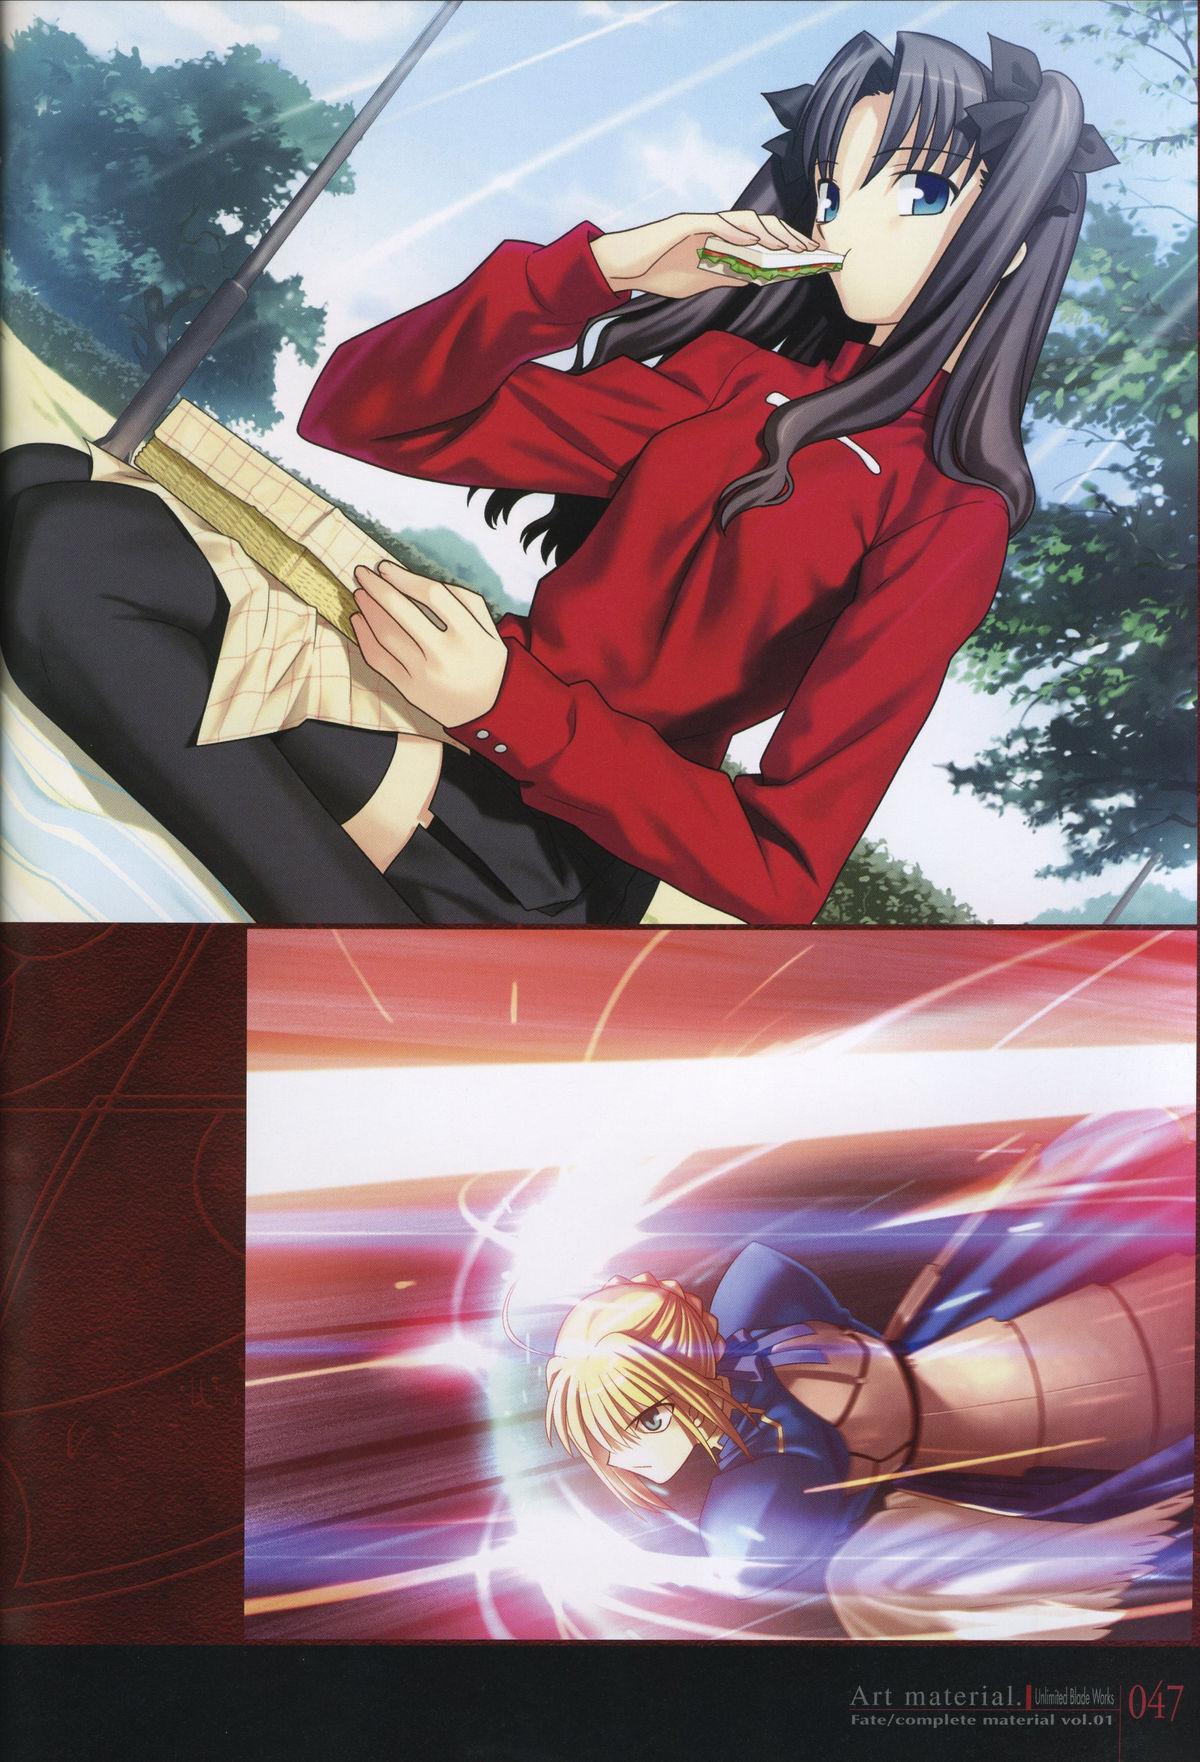 Fate/complete material I - Art material. 51